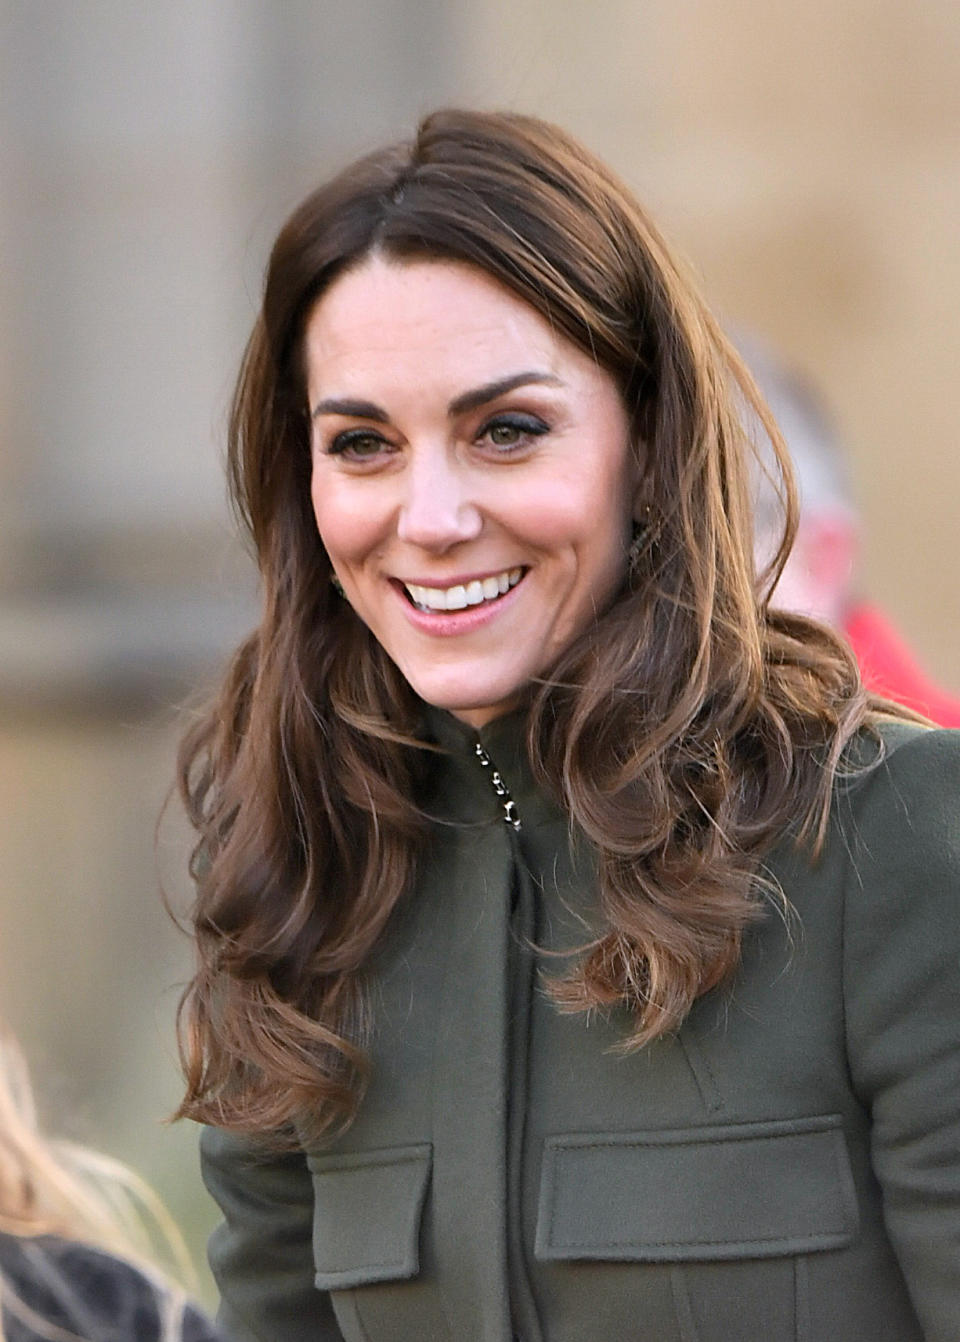 BRADFORD, ENGLAND - JANUARY 15: Catherine, Duchess of Cambridge leaves after her visit to City Hall in Bradford's Centenary Square, on January 15, 2020 in Bradford, United Kingdom. (Photo by Samir Hussein/WireImage)